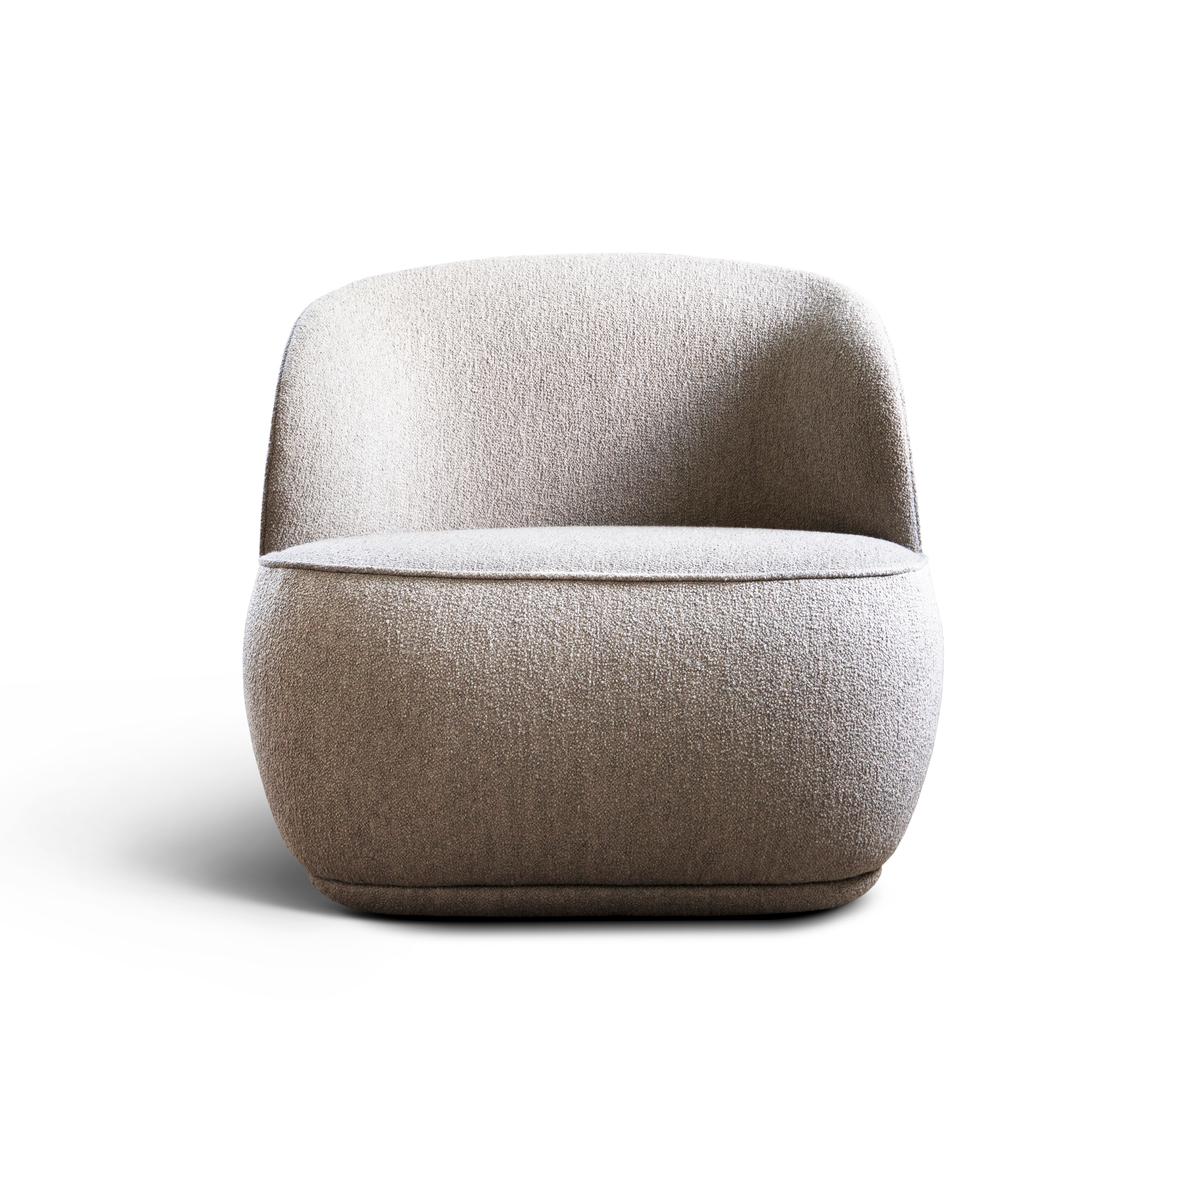 La Pipe lounge, armchair 
Design: Friends & Founders

Available with fixed base or return swivel
Upholstery available in a wide range of fabrics and leathers
Model shown (fabric): Barnum Bouclé

Price may vary depending on the swivel option and